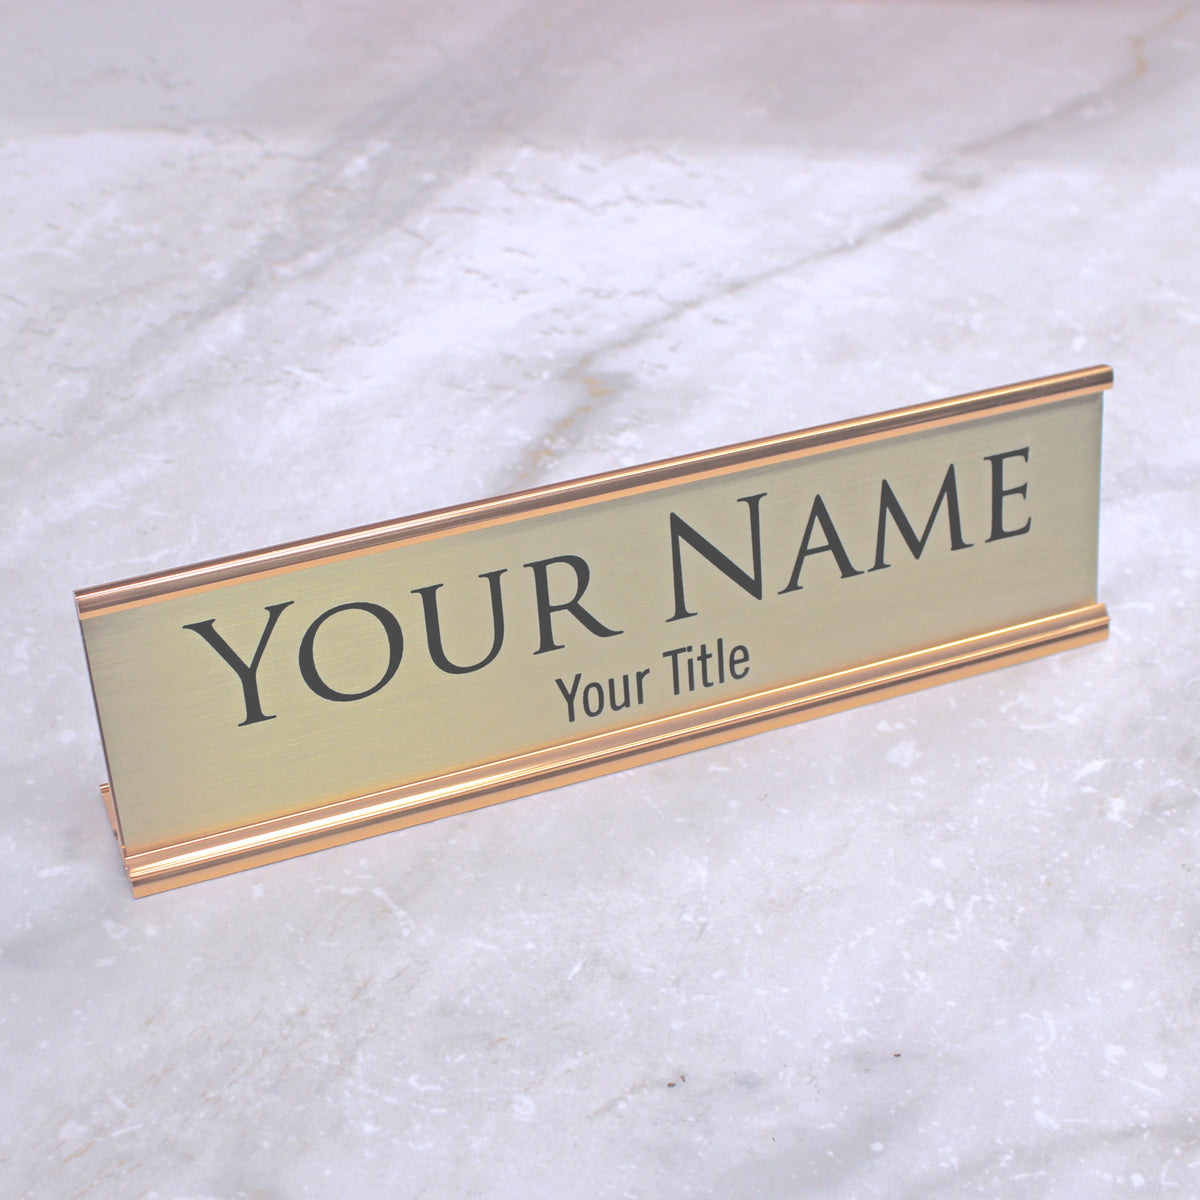 Personalized Metal Desk Sign - Gold